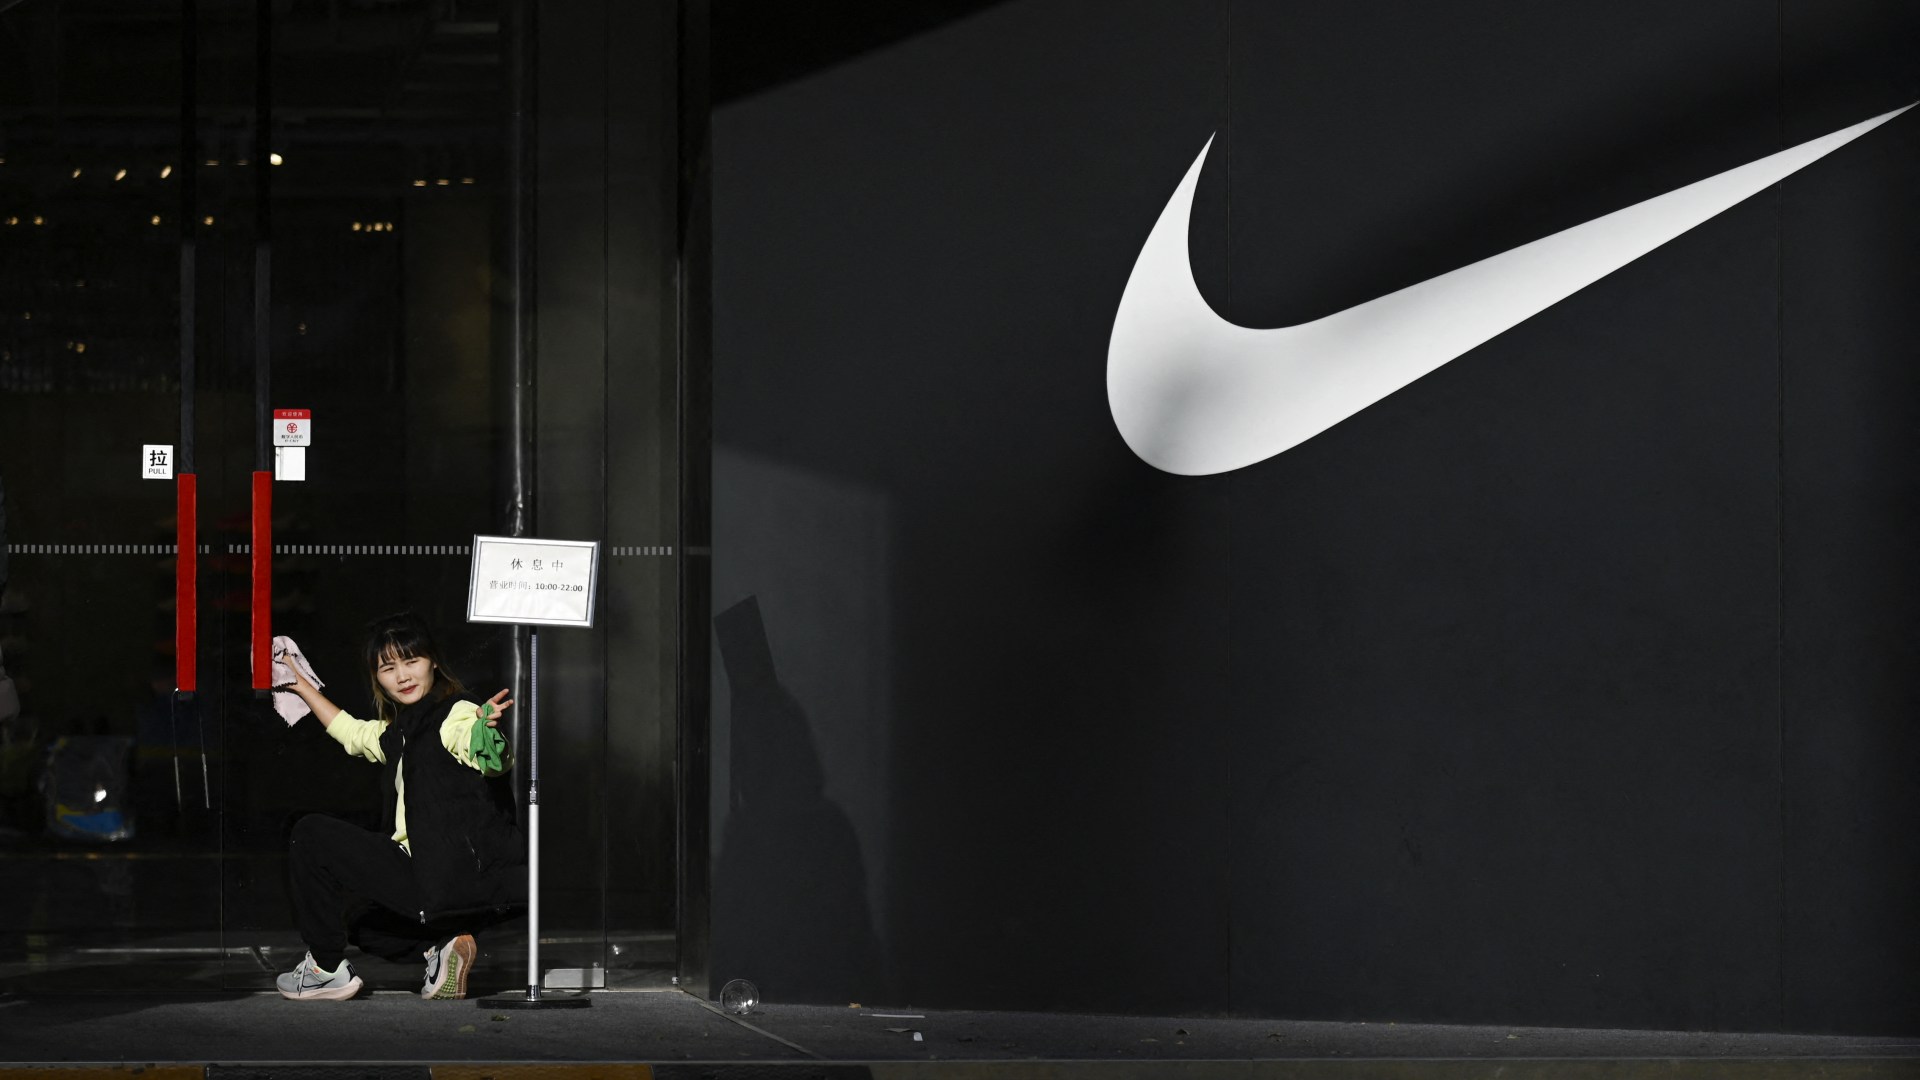 Nike boss blames staff working from home for sales slump after shoe firm loses ground to adidas [Video]